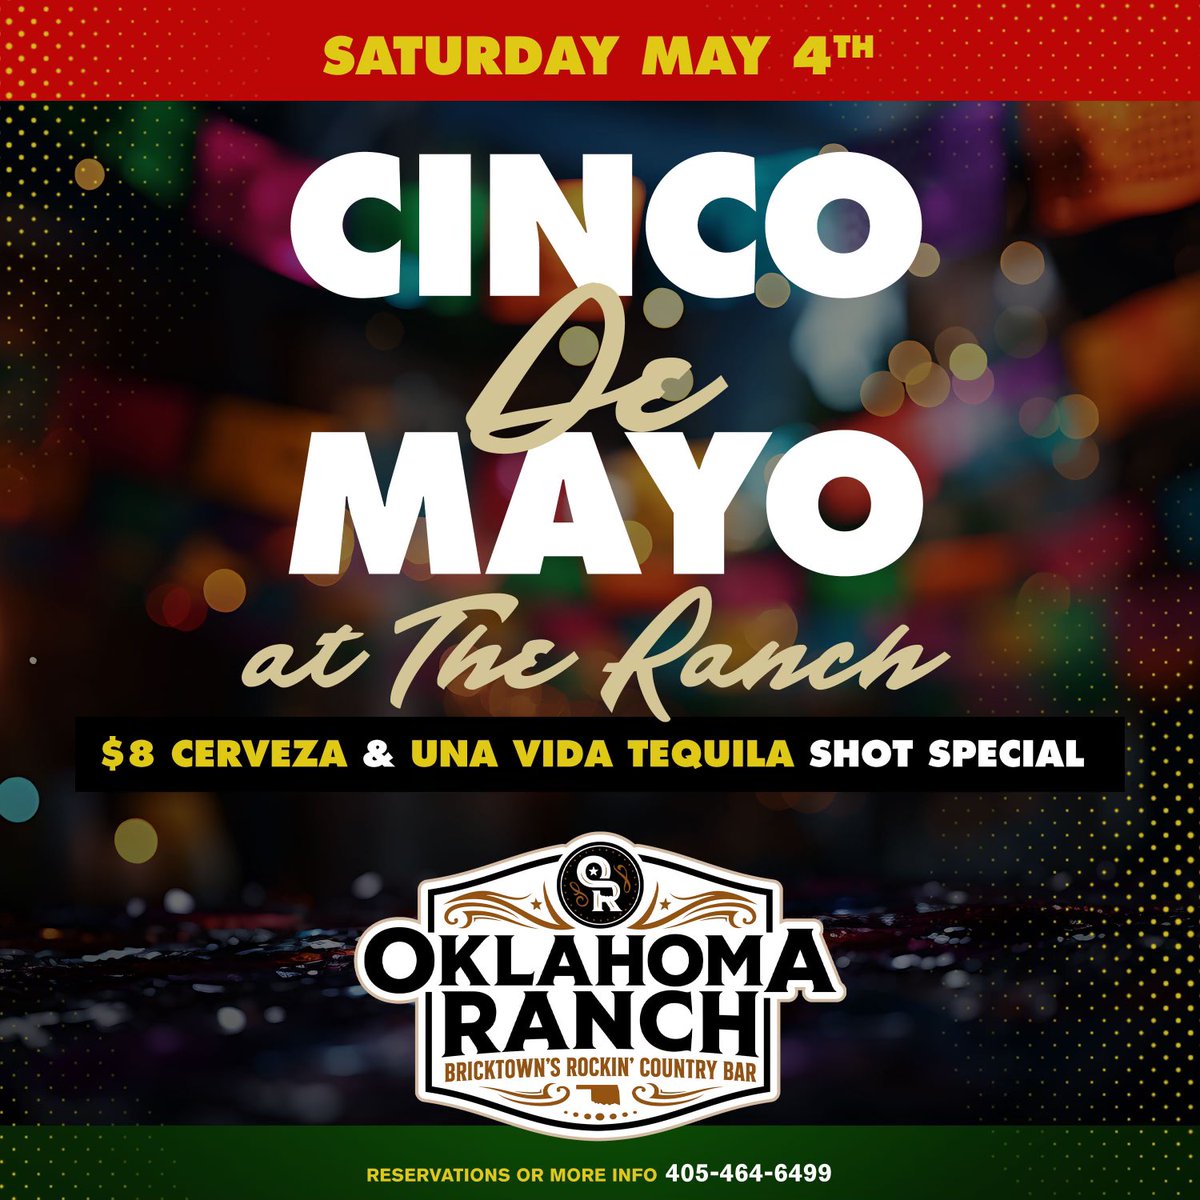 Cowboy Up! Cinco De Mayo specials all weekend at The Ranch in Bricktown OKC.